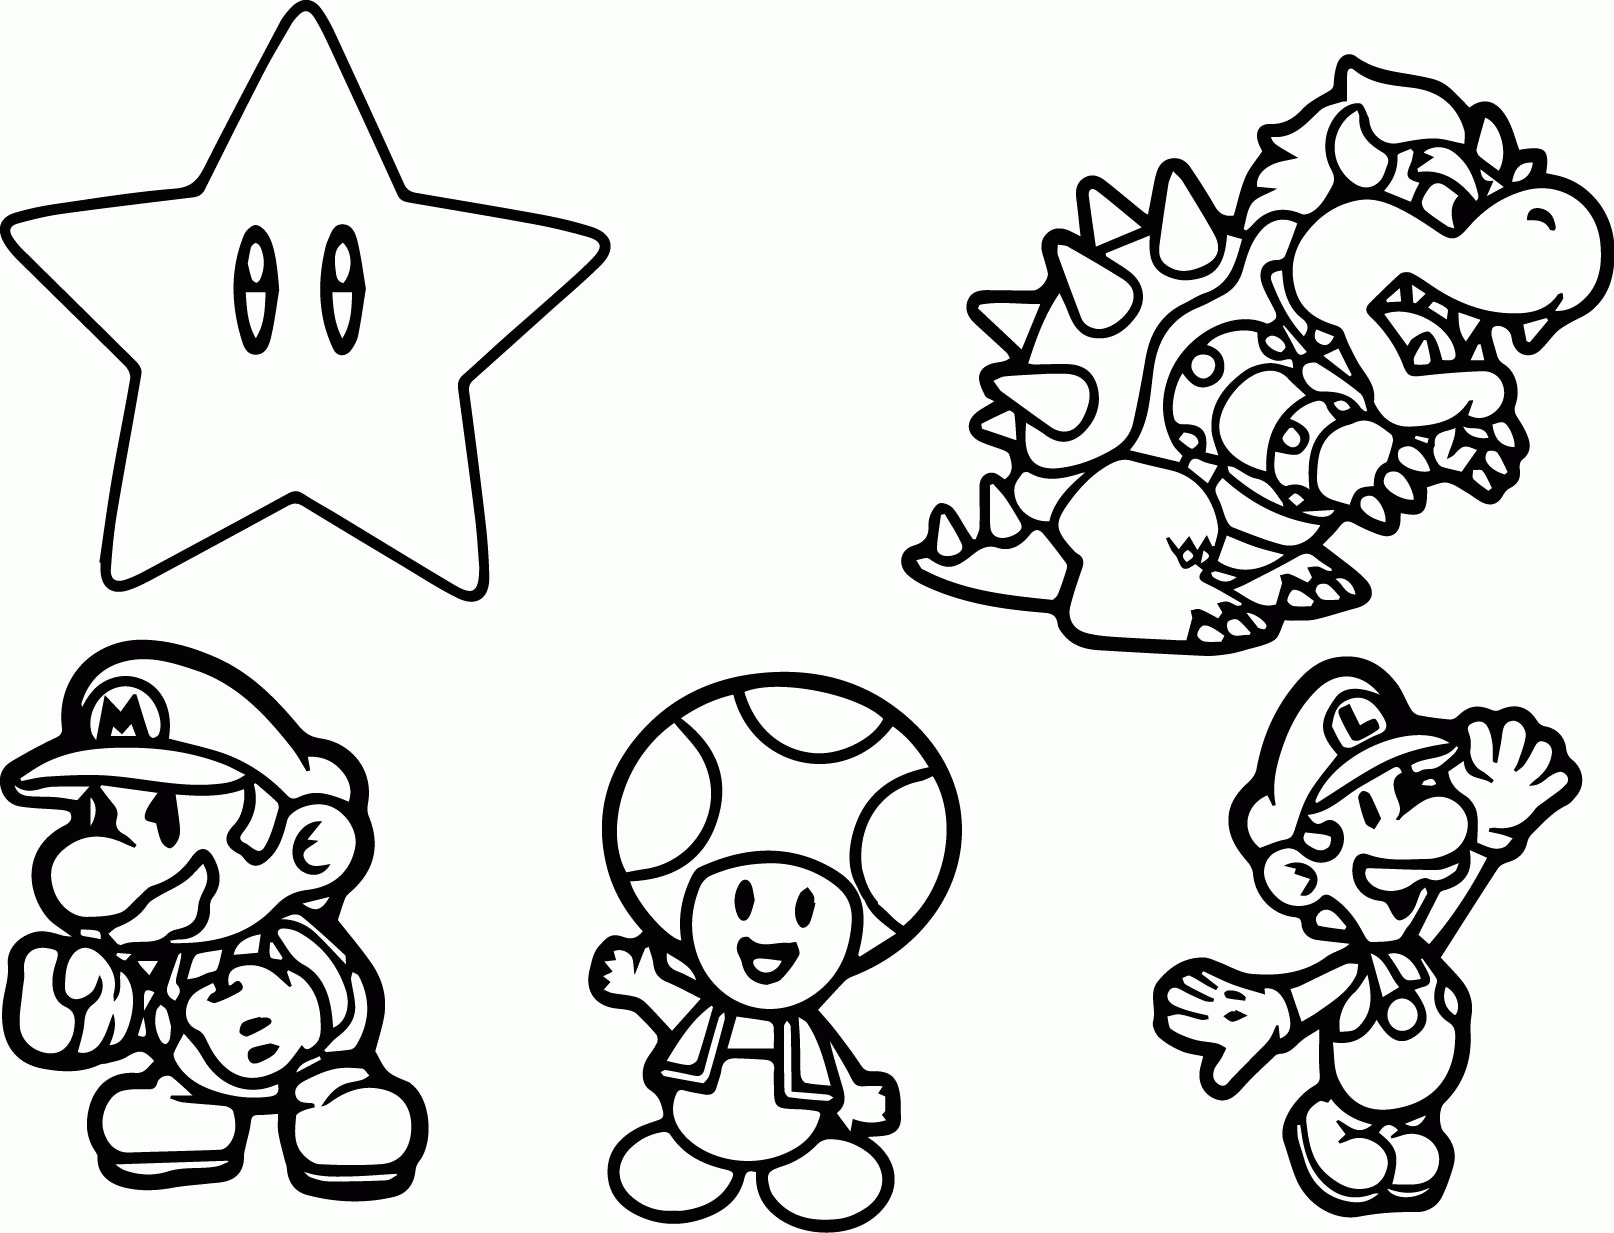 mario-characters-drawing-easy-clip-art-library